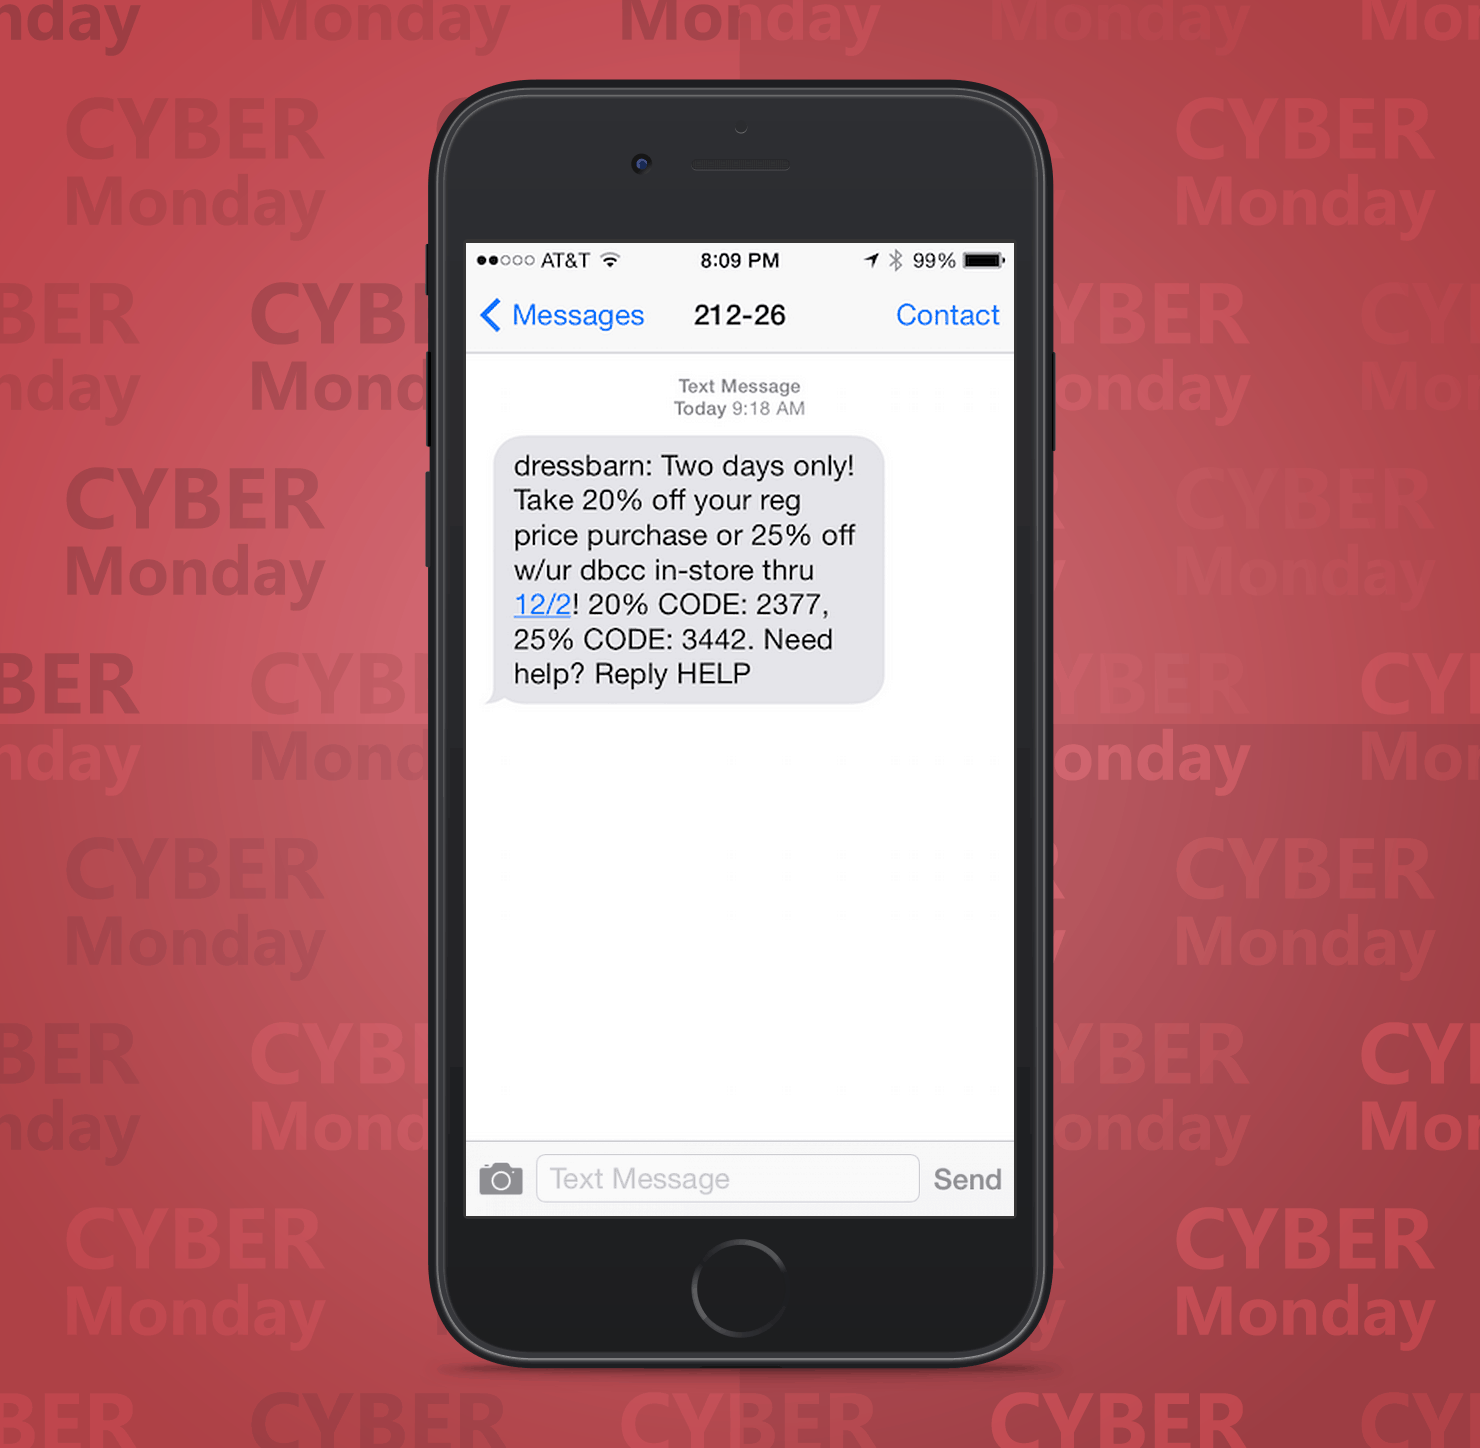 SMS Coupon Example Sent on Cyber Monday From Dressbarn Retail Stores to Customers